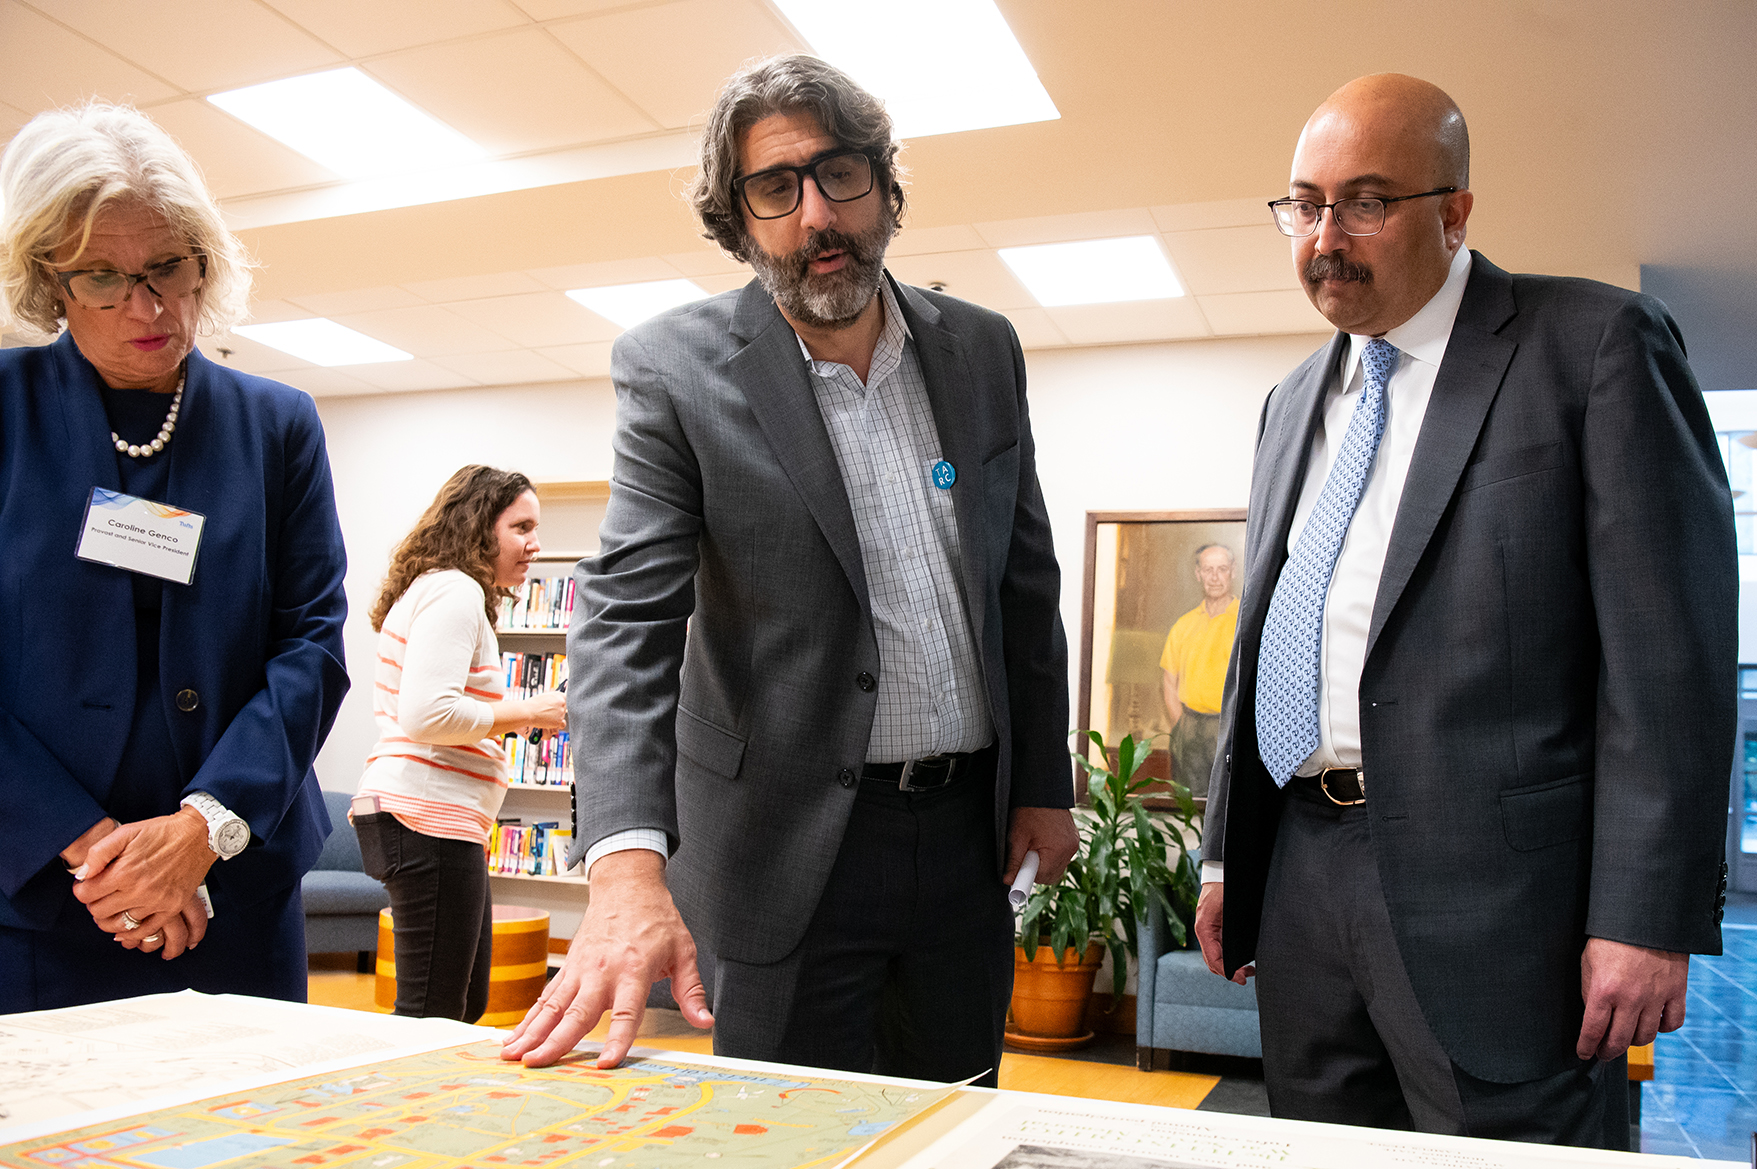 President Sunil Kumar and Provost and Senior Vice President Caroline Genco view archival material with Dan Santamaria, Director of the Tufts Archival Research Center.